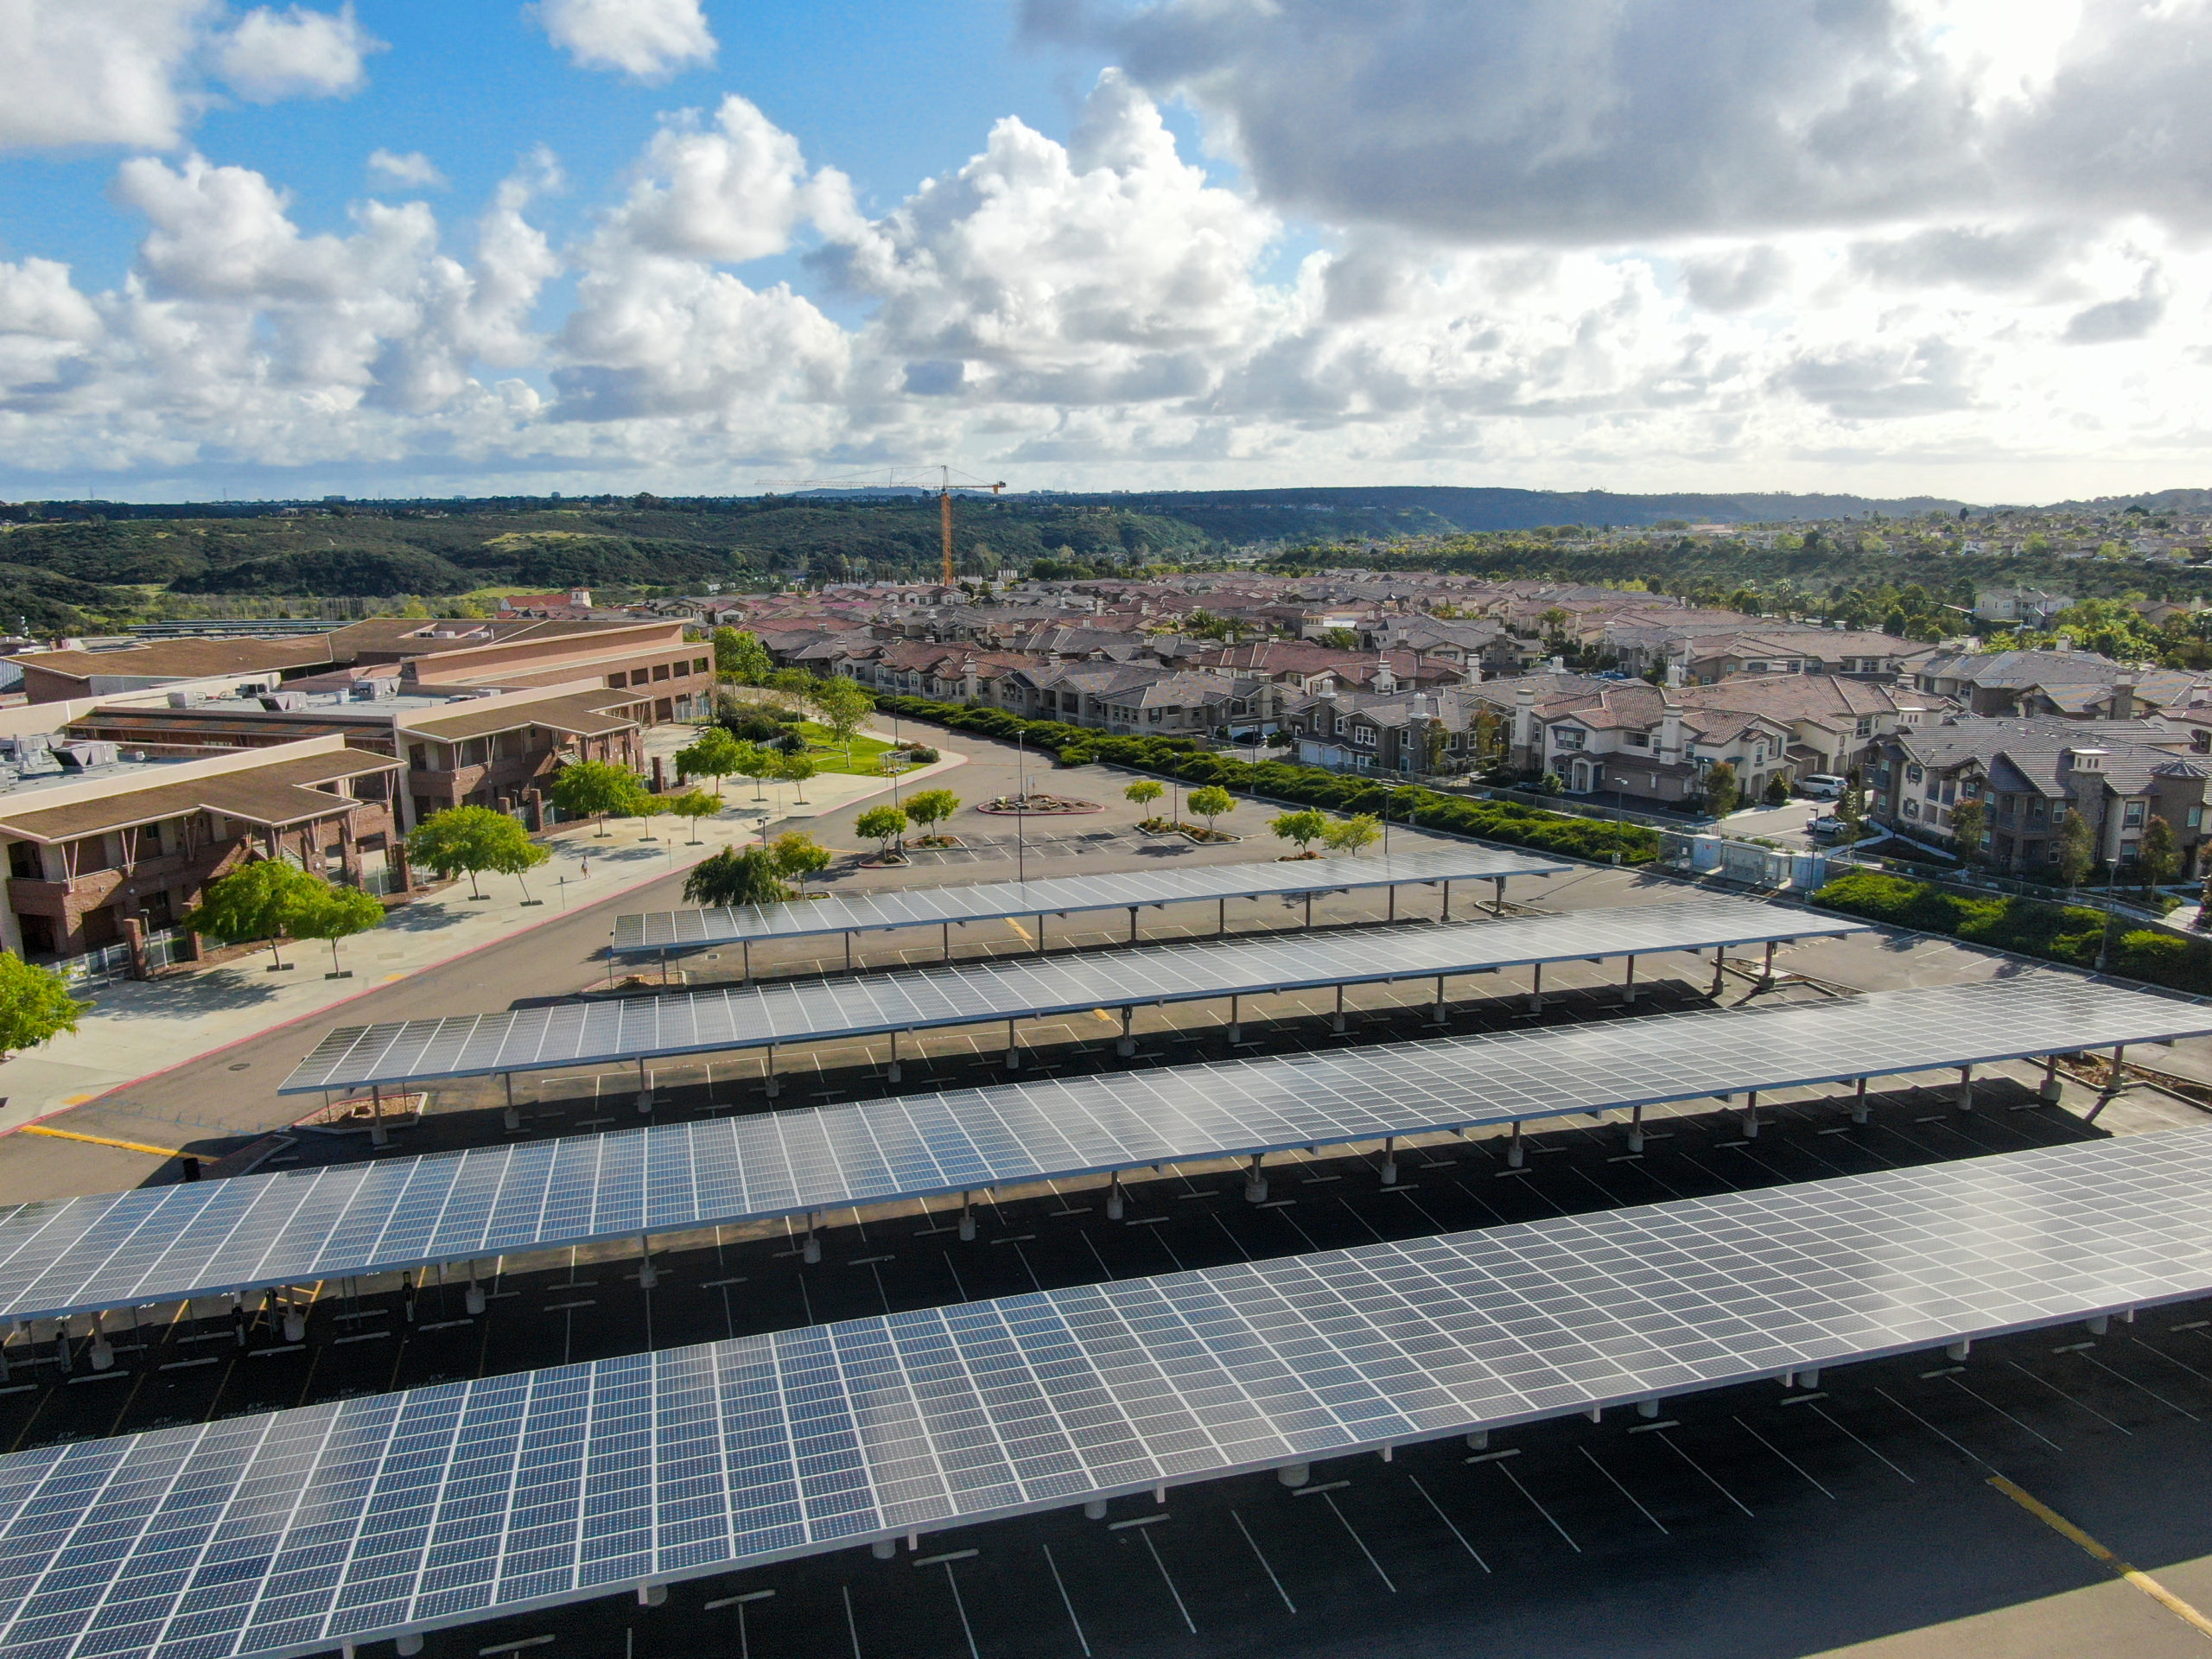 aerial-view-solar-power-plant-installed-top-parking-lot-renewable-energy-solar-panels